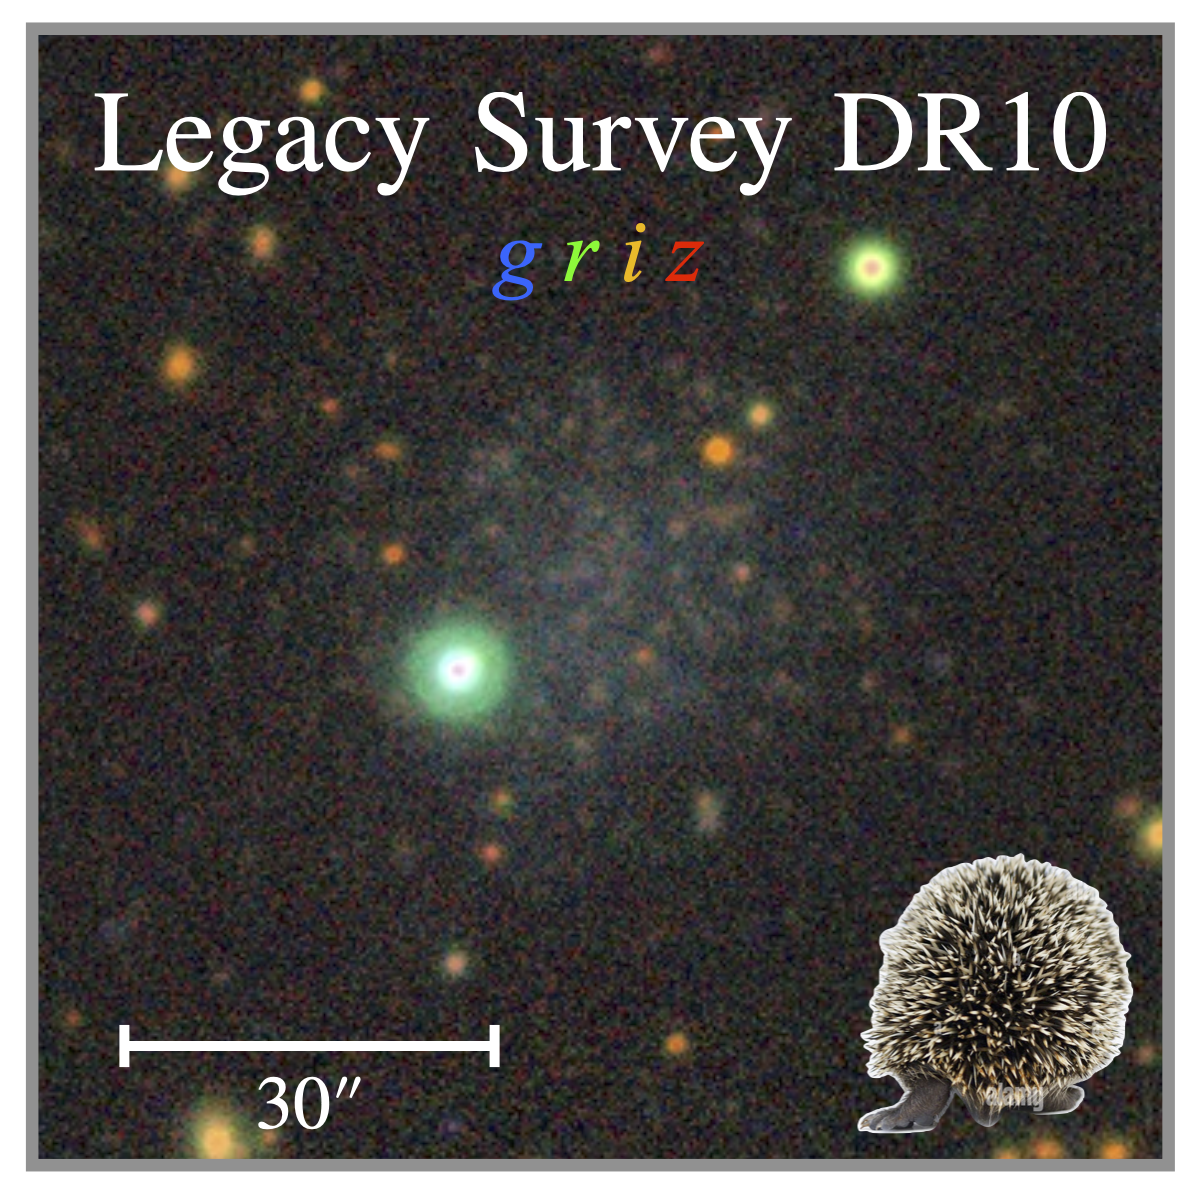 Hedgehog: an isolated quiescent dwarf galaxy at 2.4 Mpc